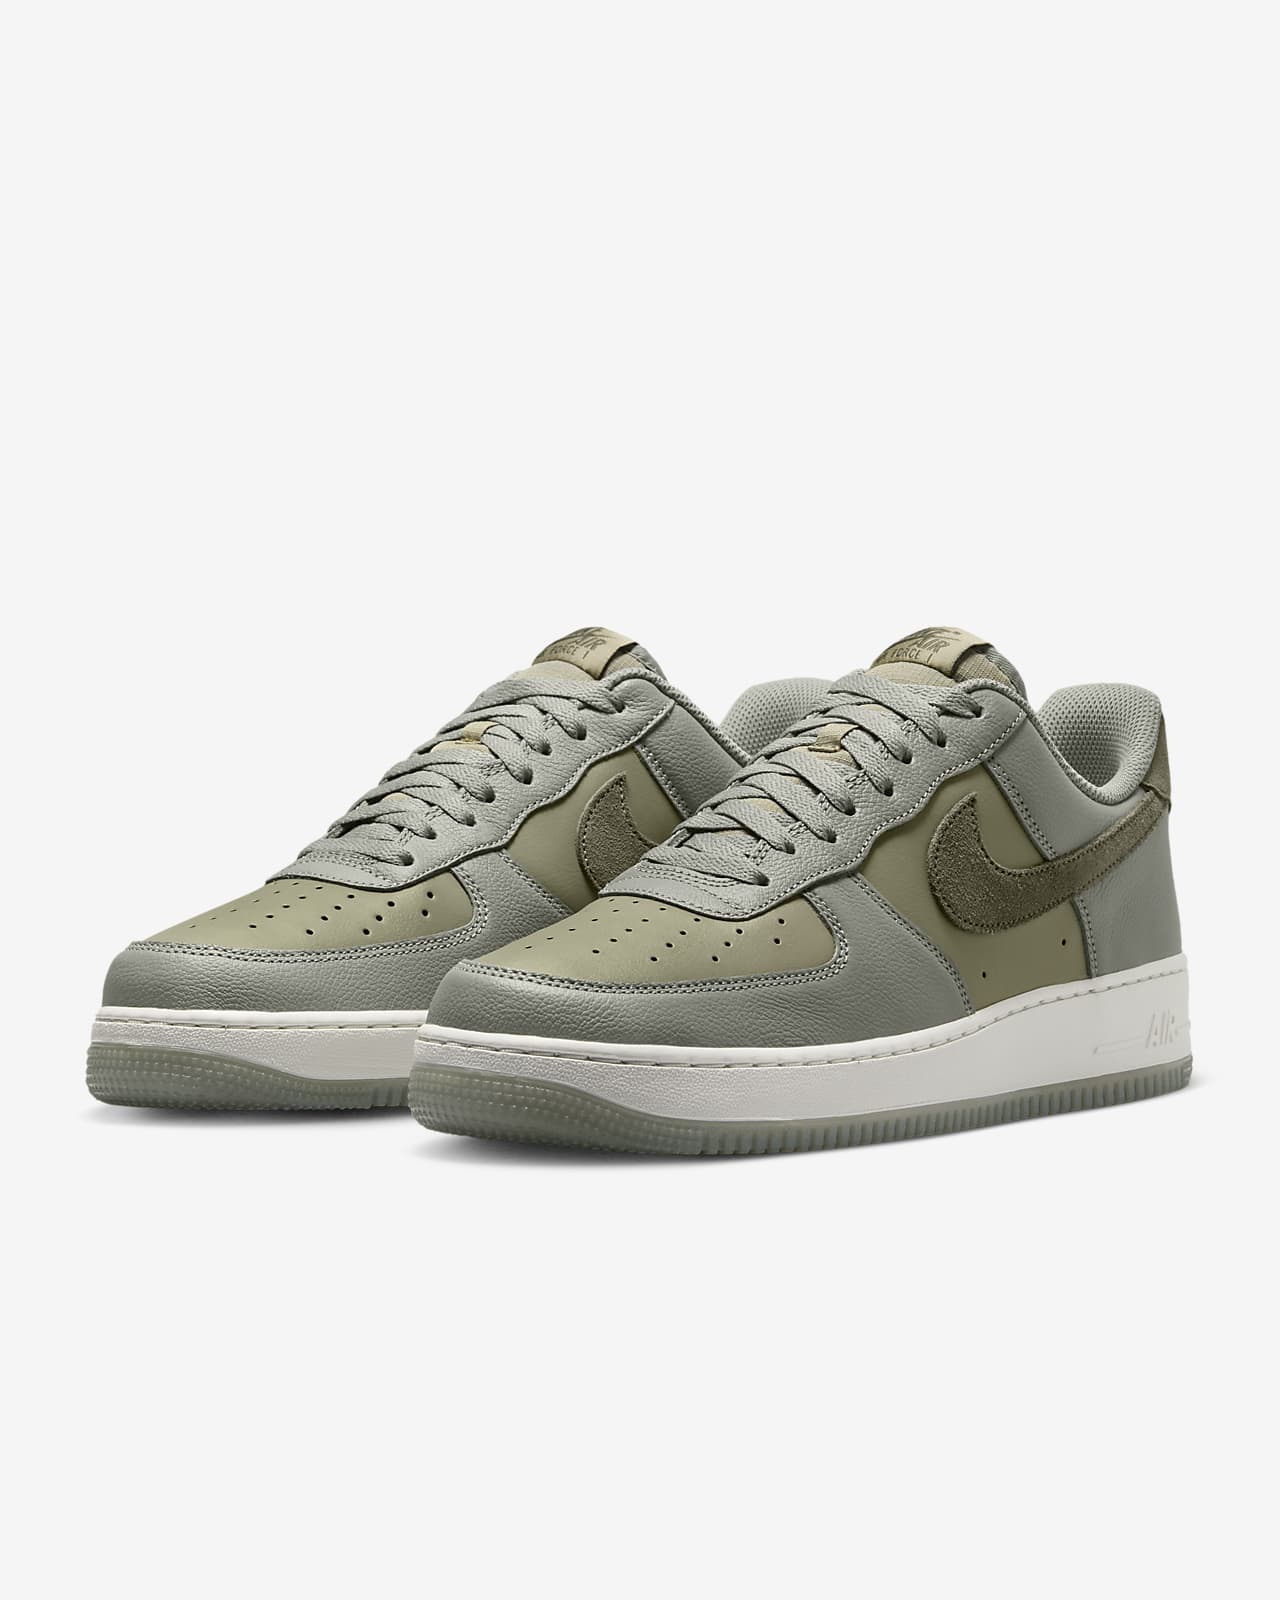 NIKE AIR FORCE1 '07LV8 4 【FOSSIL】